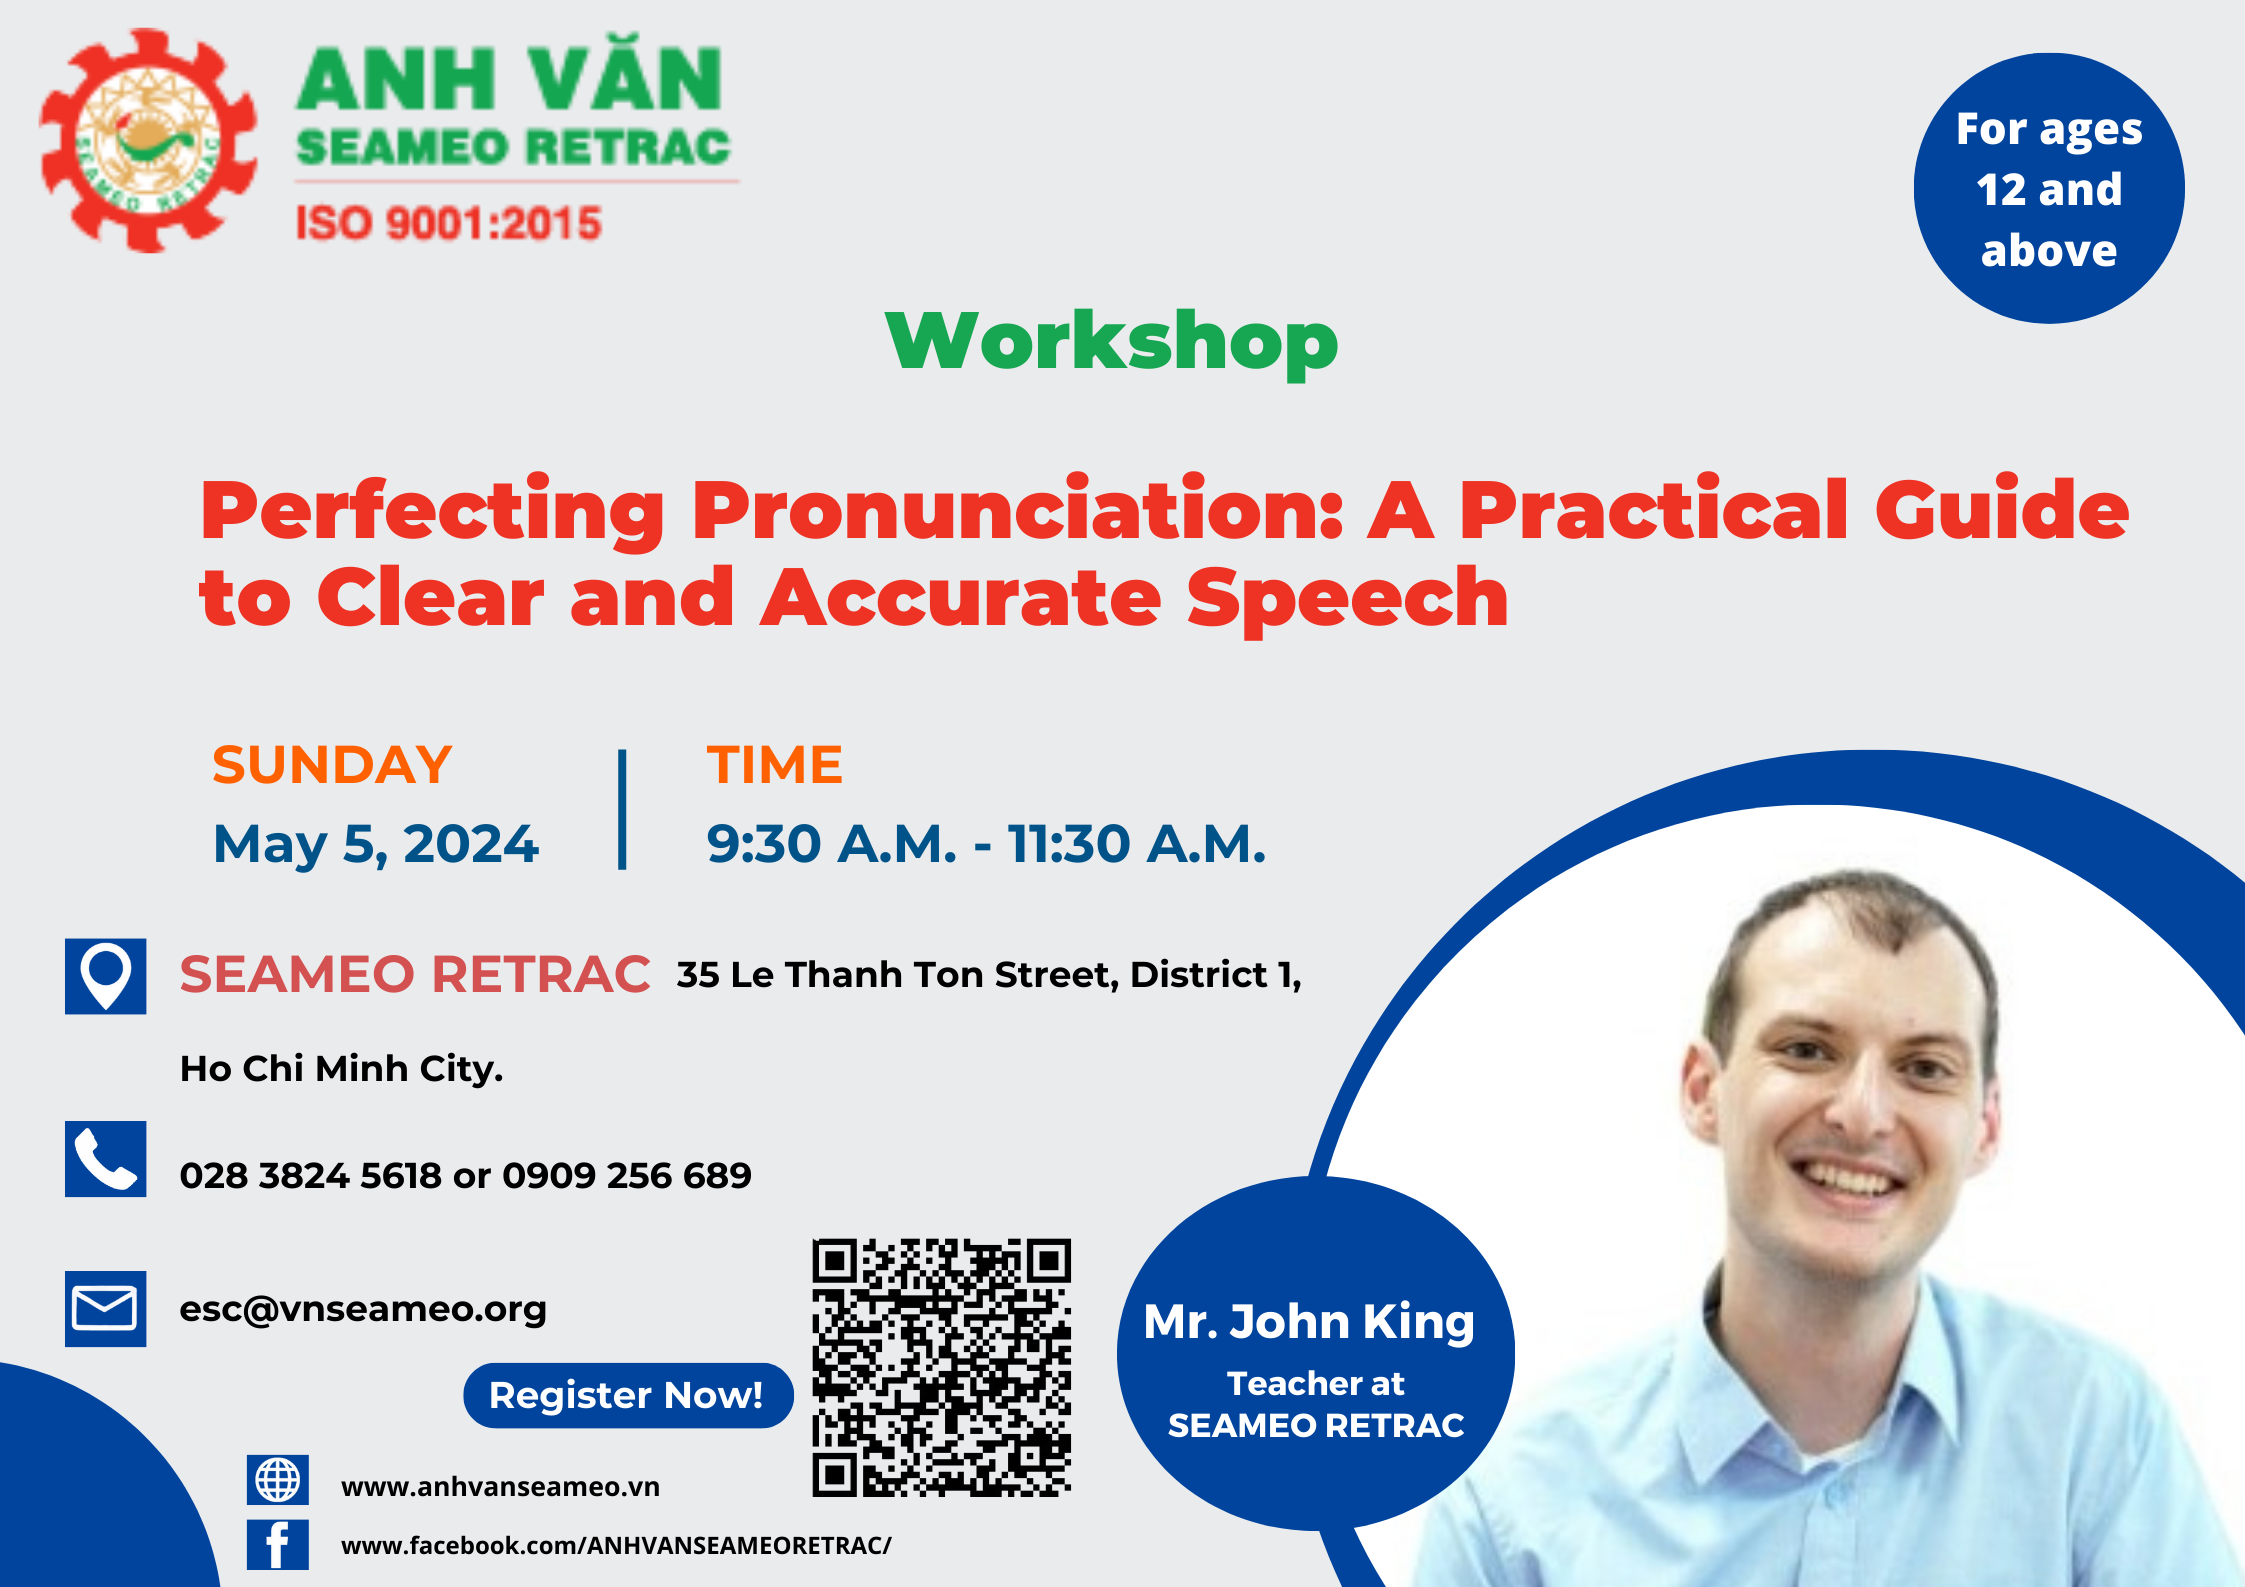 Workshop: “Perfecting Pronunciation: A Practical Guide to Clear and Accurate Speech”